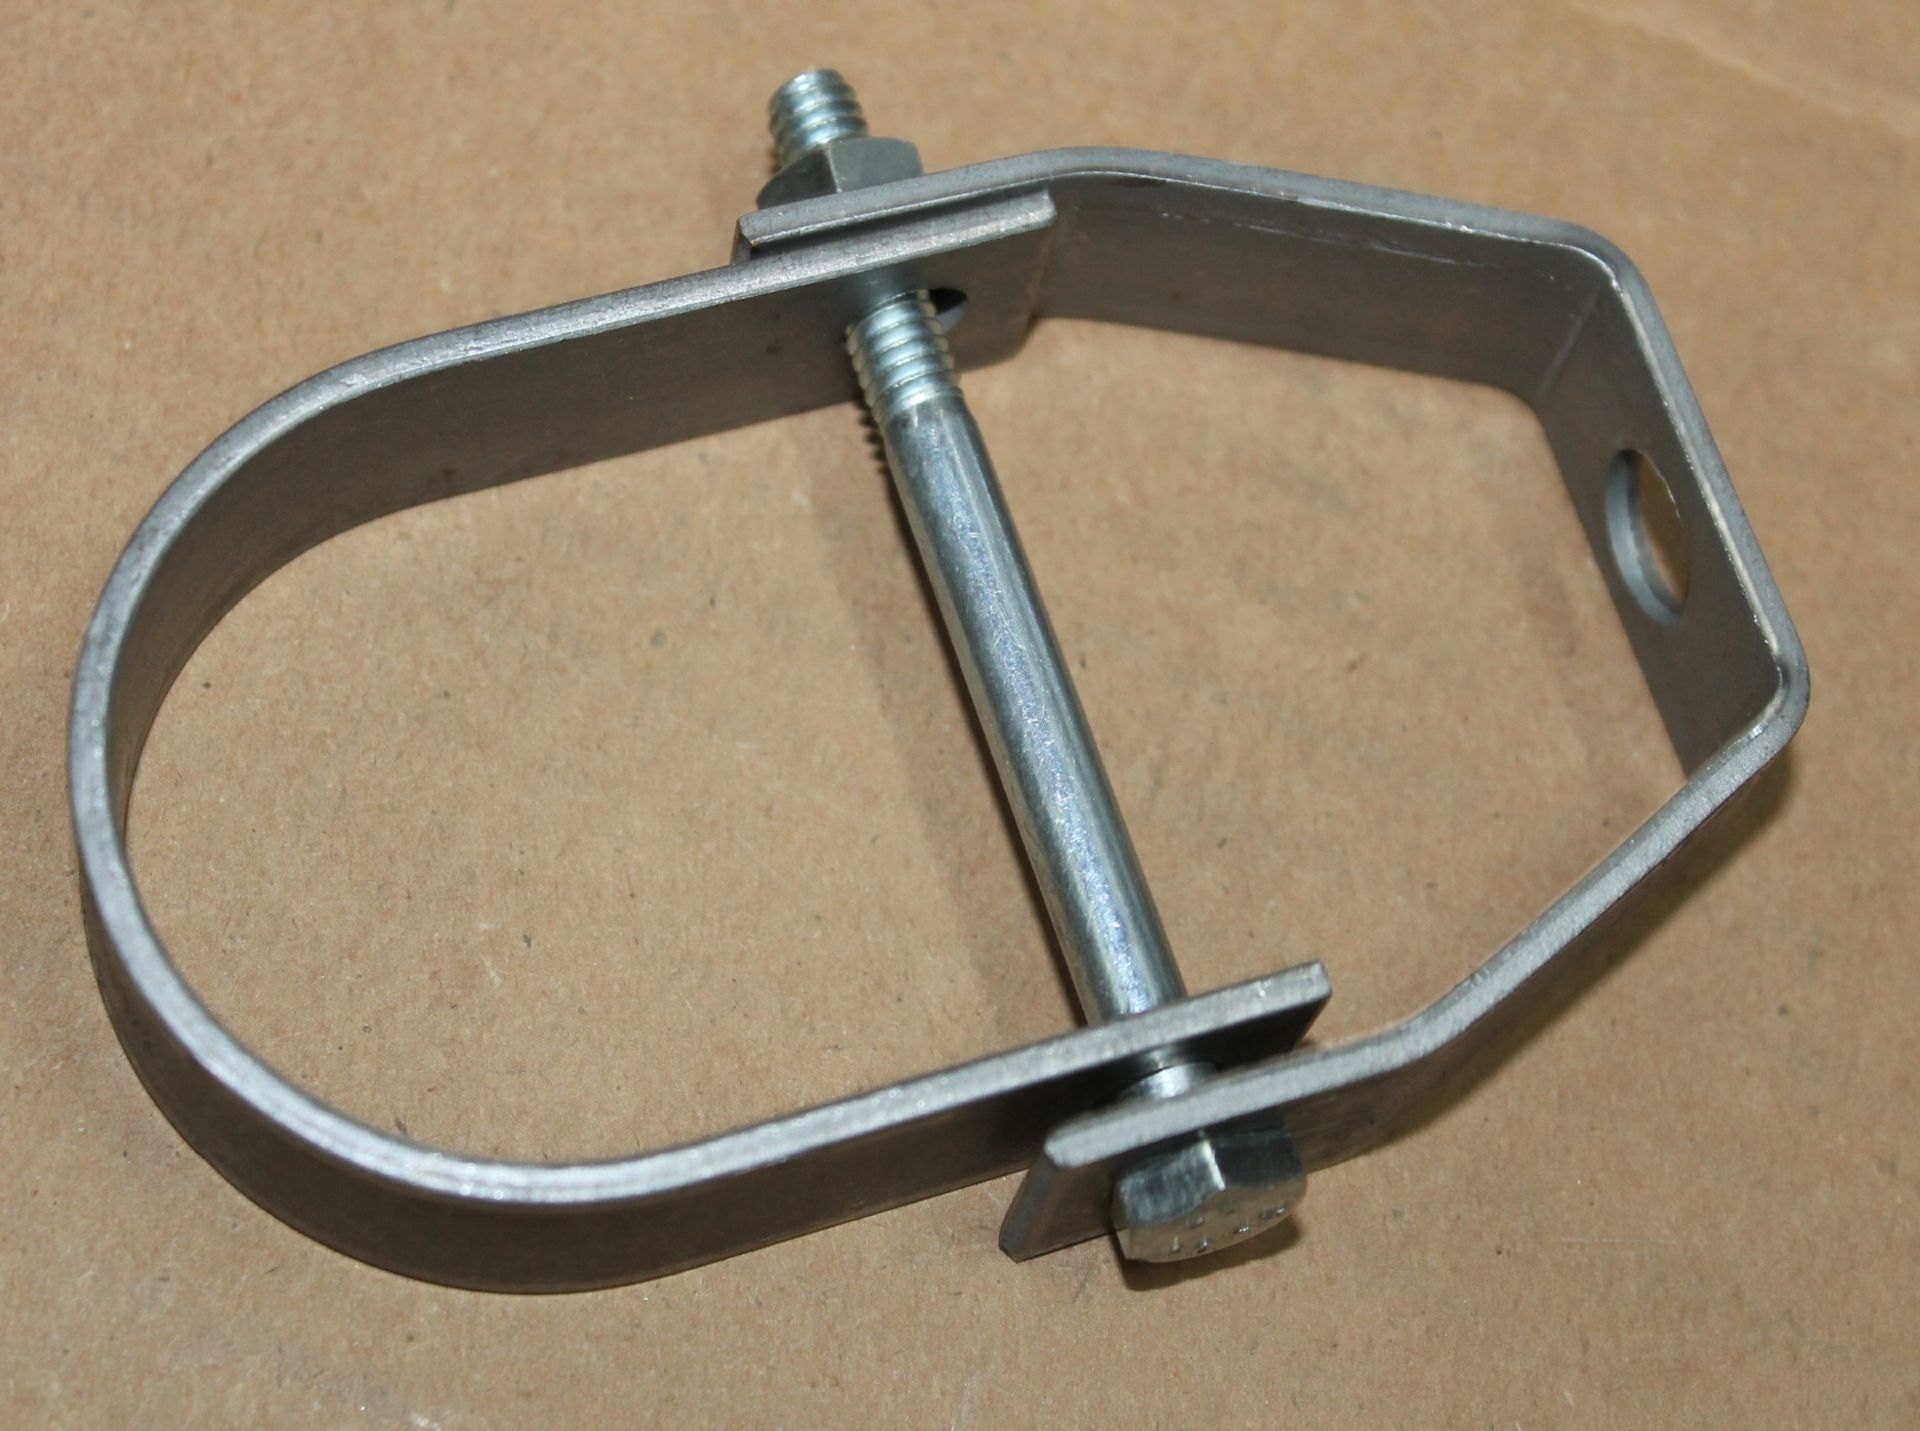 CLEVIS 1 1/2" PIPE HANGERS, - Image 2 of 2